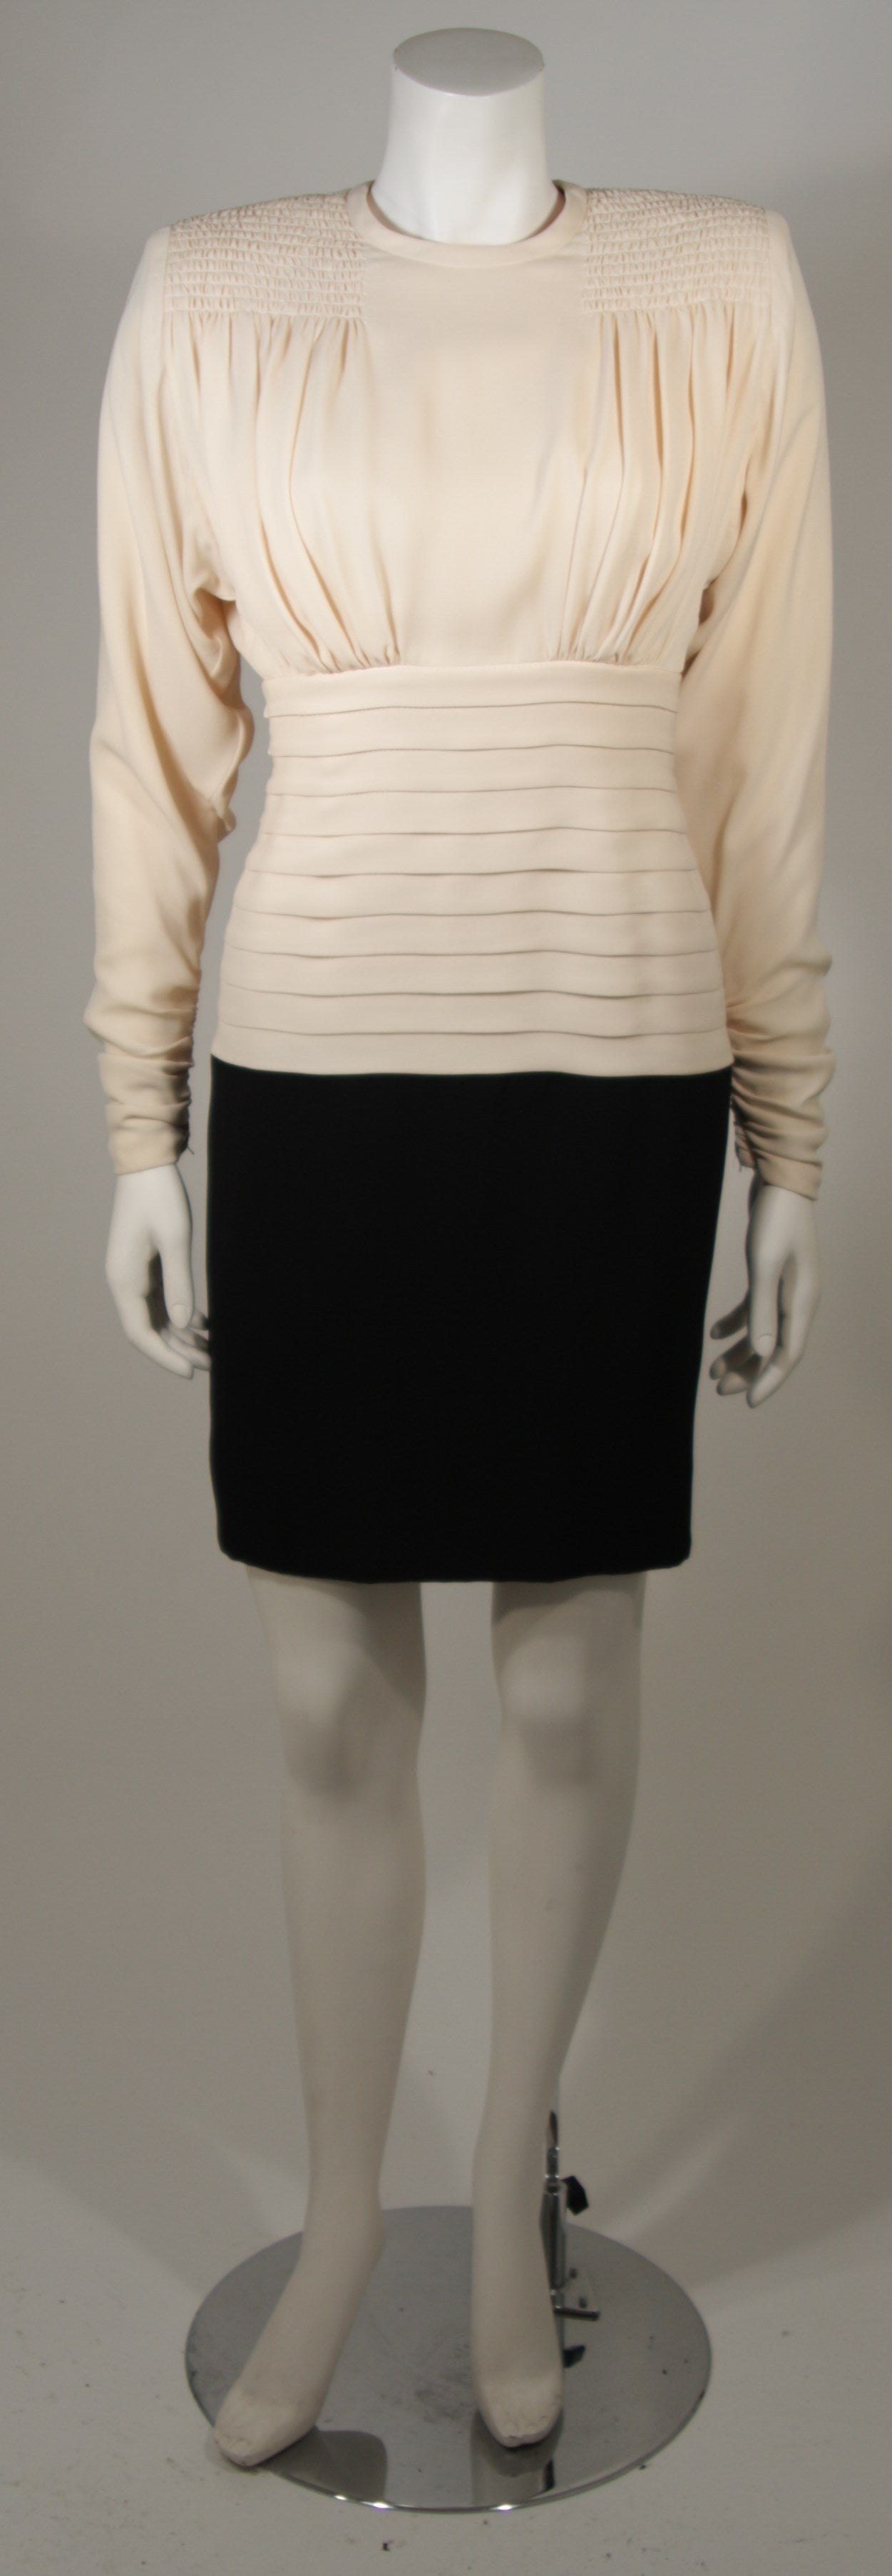 This cocktail dress attributed to Galanos is available for viewing at our Beverly Hills Boutique. The dress is composed of a black and ivory contrasting silk combination. The dress features smocking at the shoulders, pleating at the waist, and